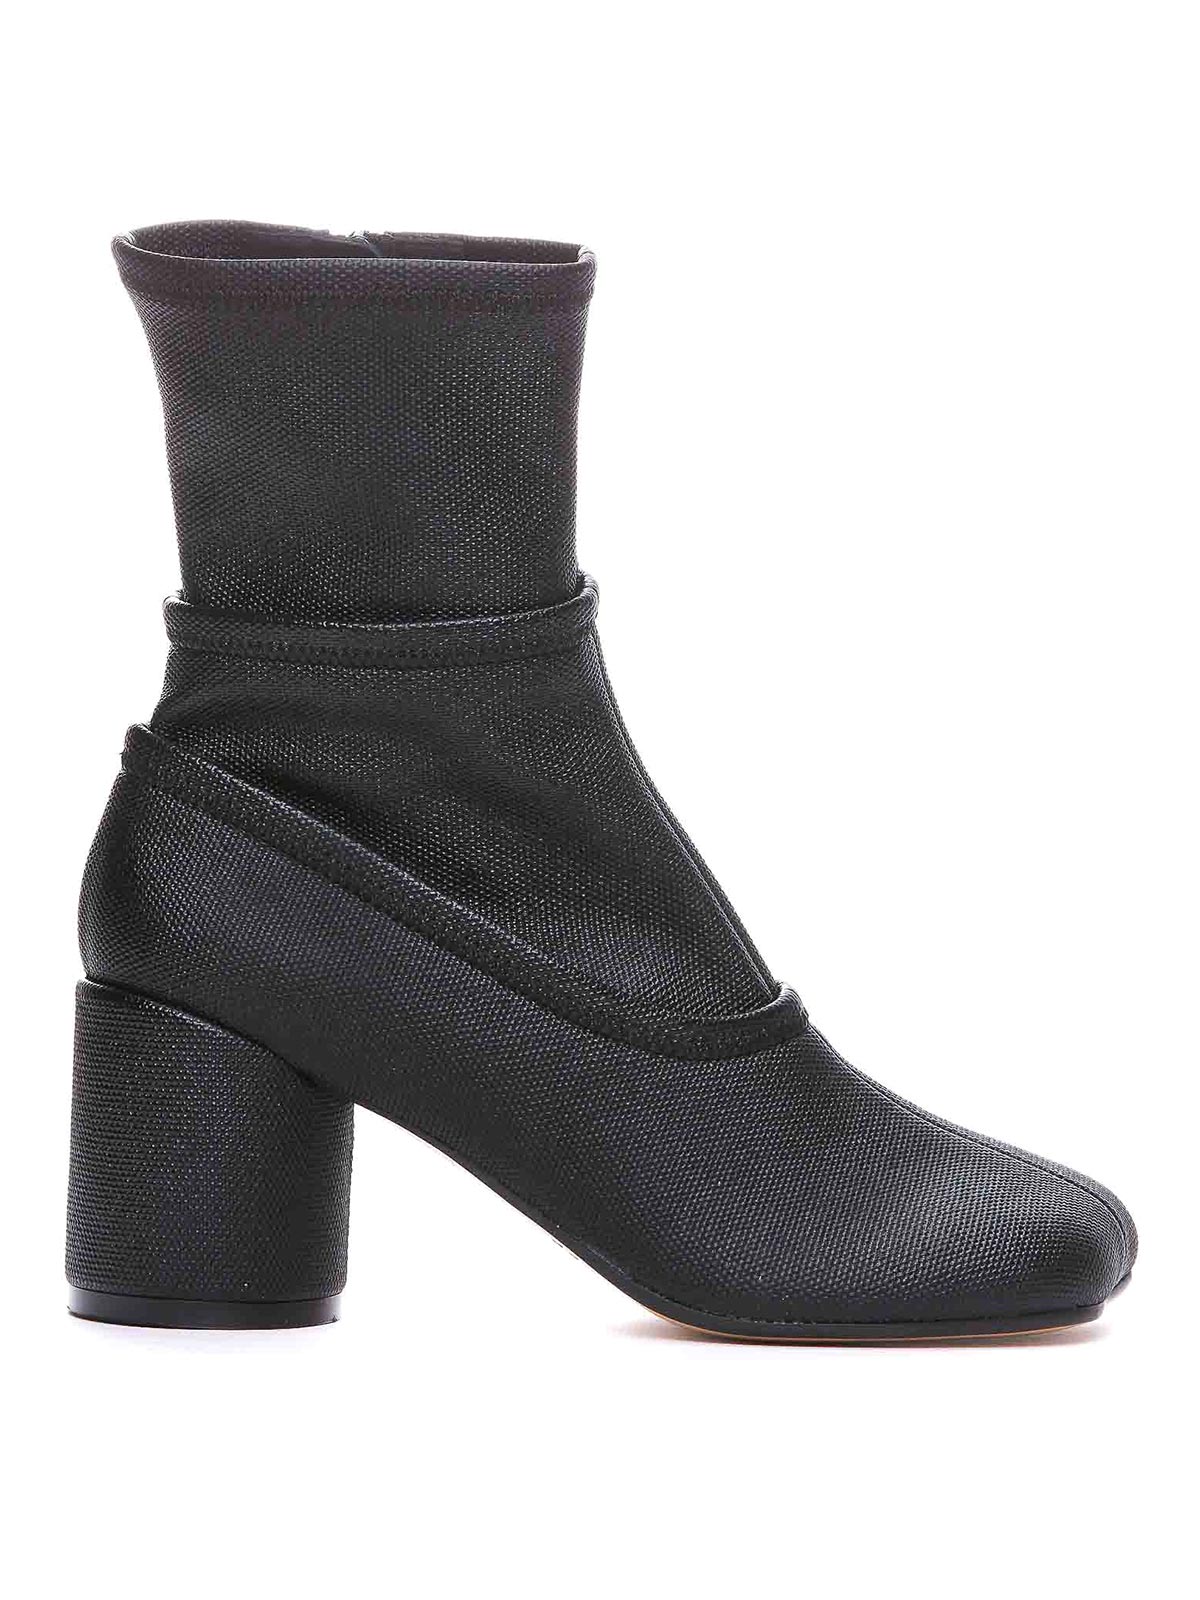 Mm6 Maison Margiela Anatomic Ankle Boots In Negro